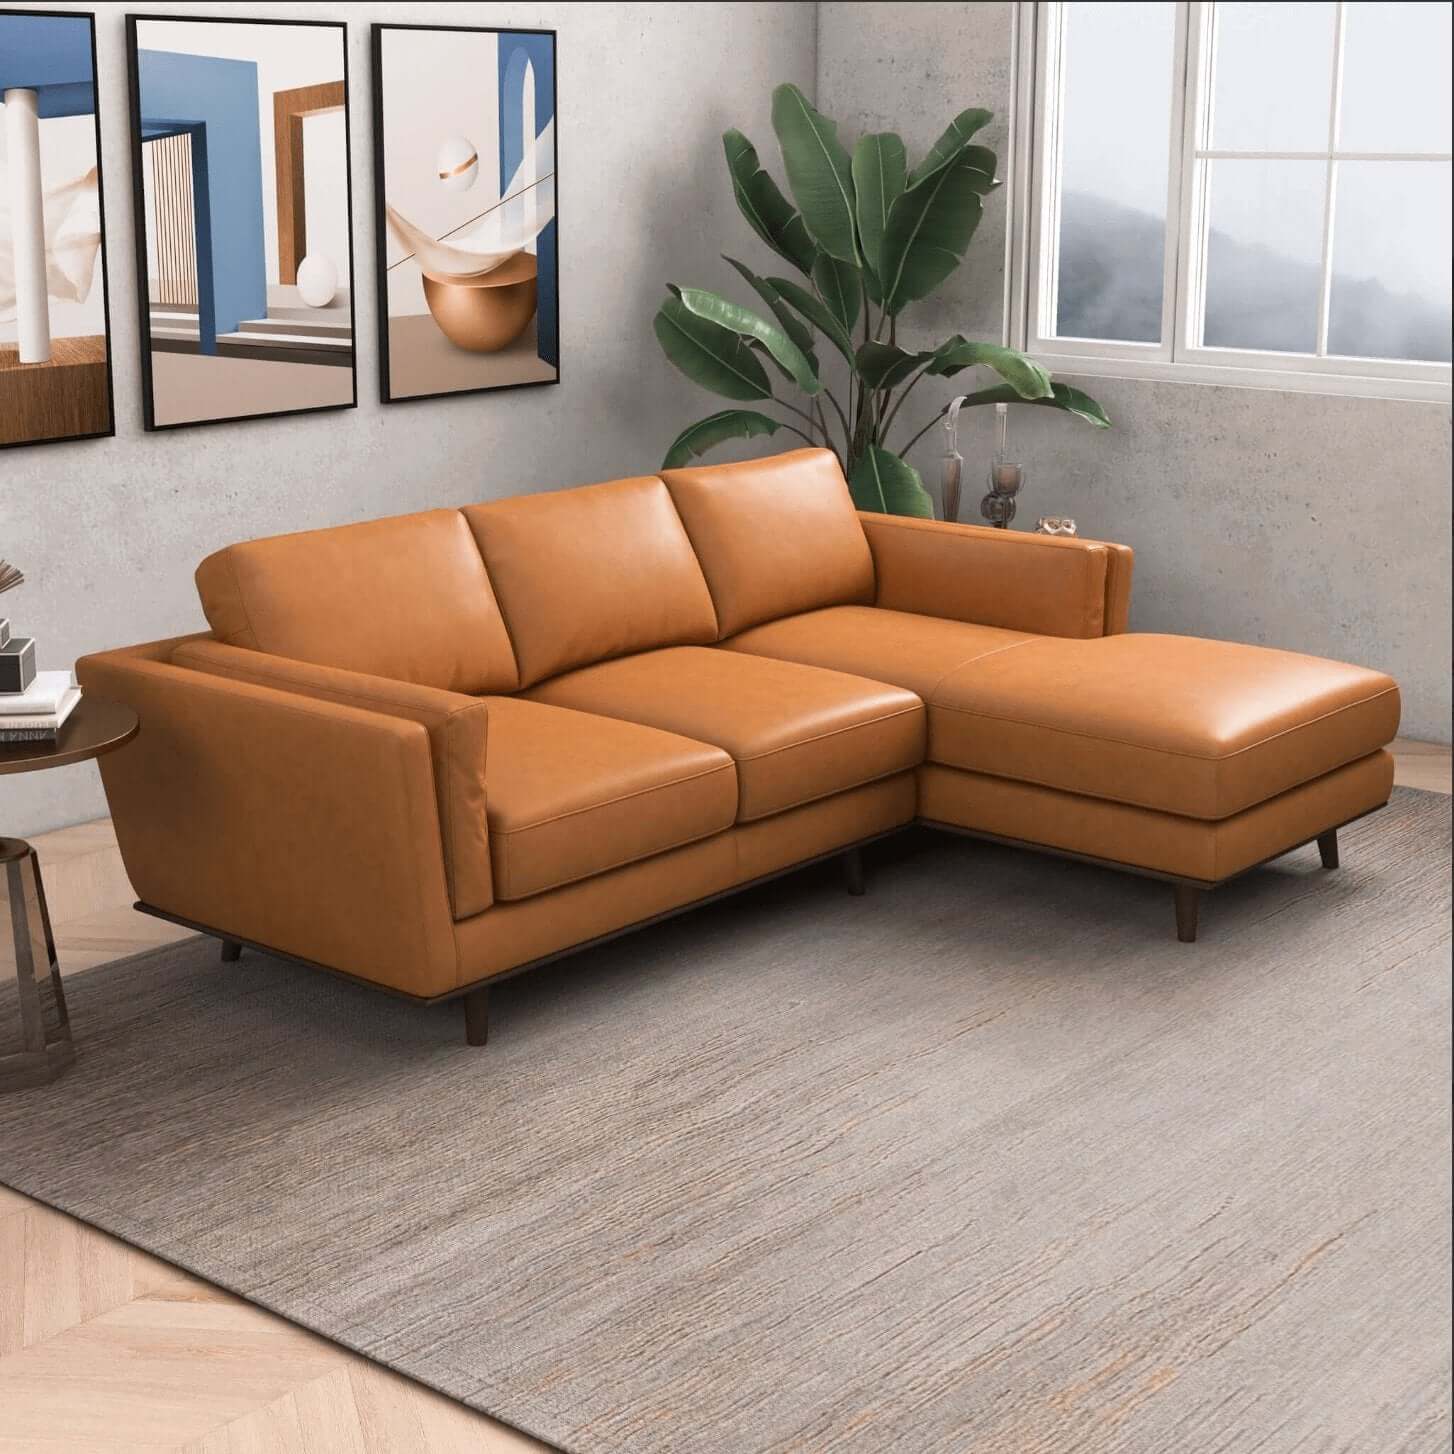 Chase MCM Leather Chaise Sectional Sofa 92" - Revel Sofa 